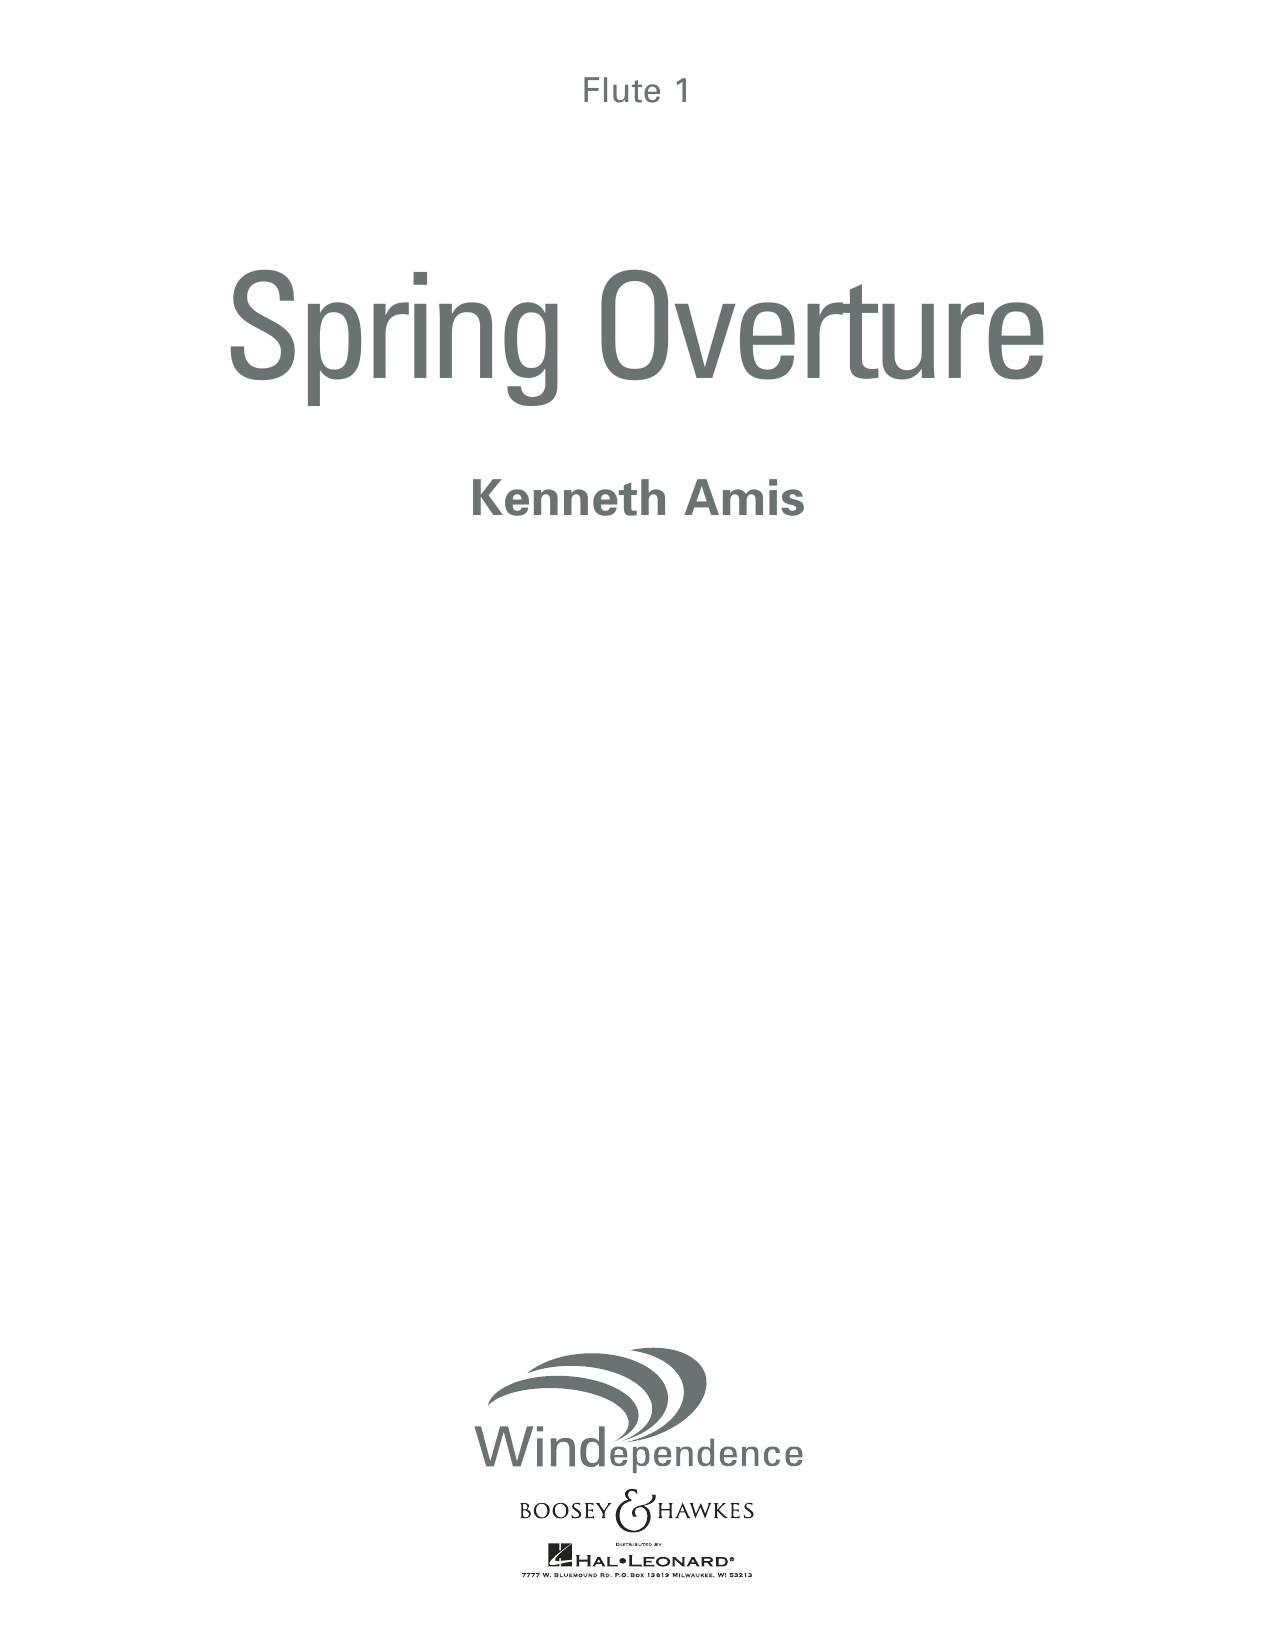 Kenneth Amis Spring Overture - Flute 1 sheet music preview music notes and score for Concert Band including 8 page(s)